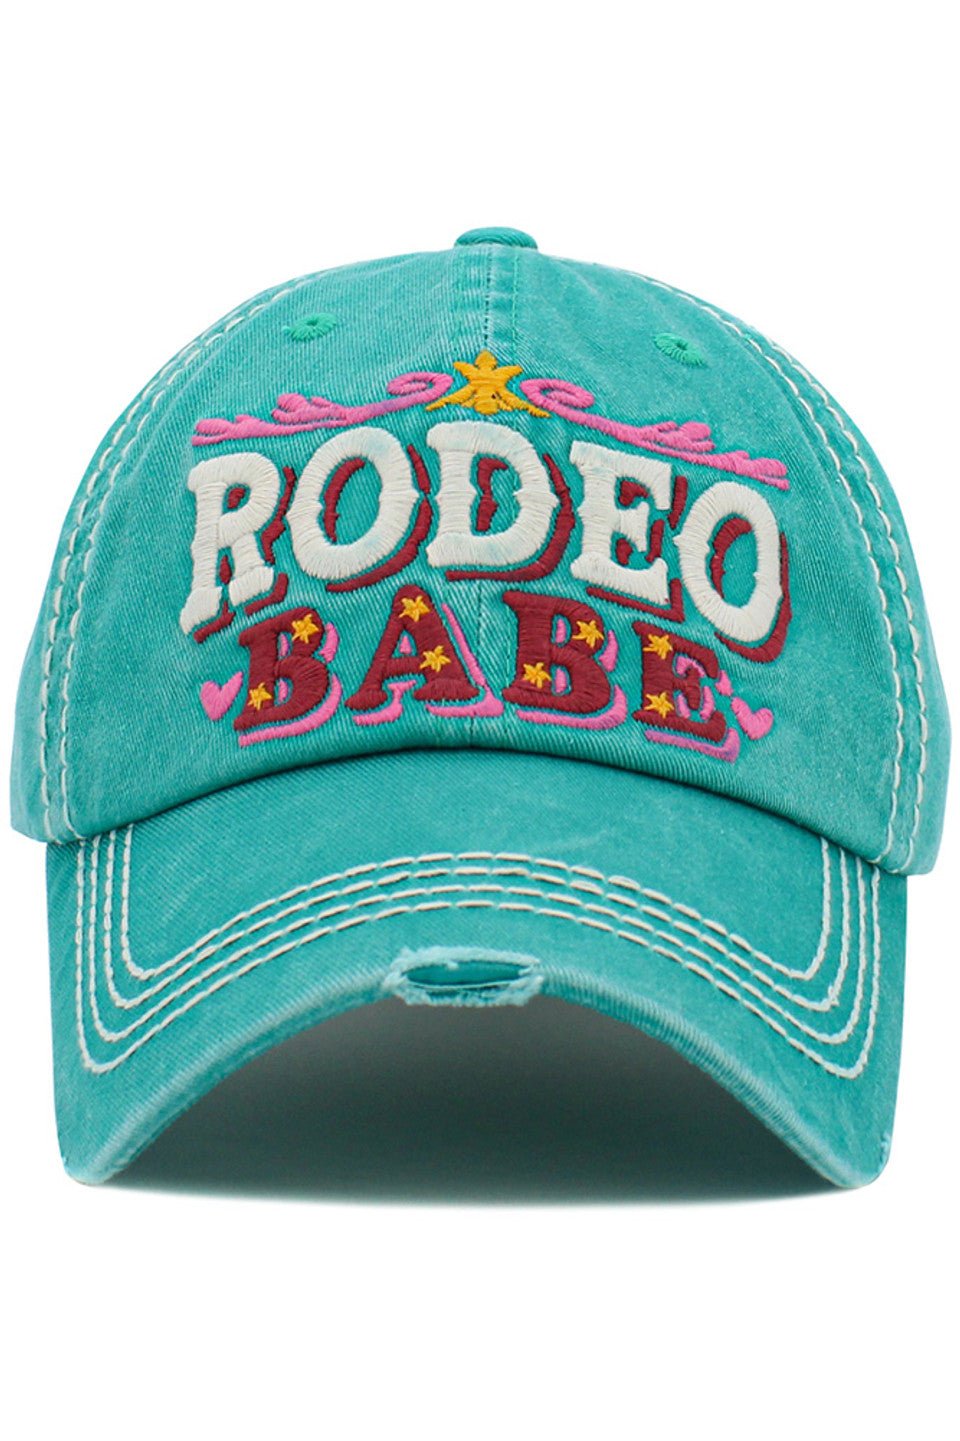 Rodeo Babe Vintage Ball Cap - Shimmer Me